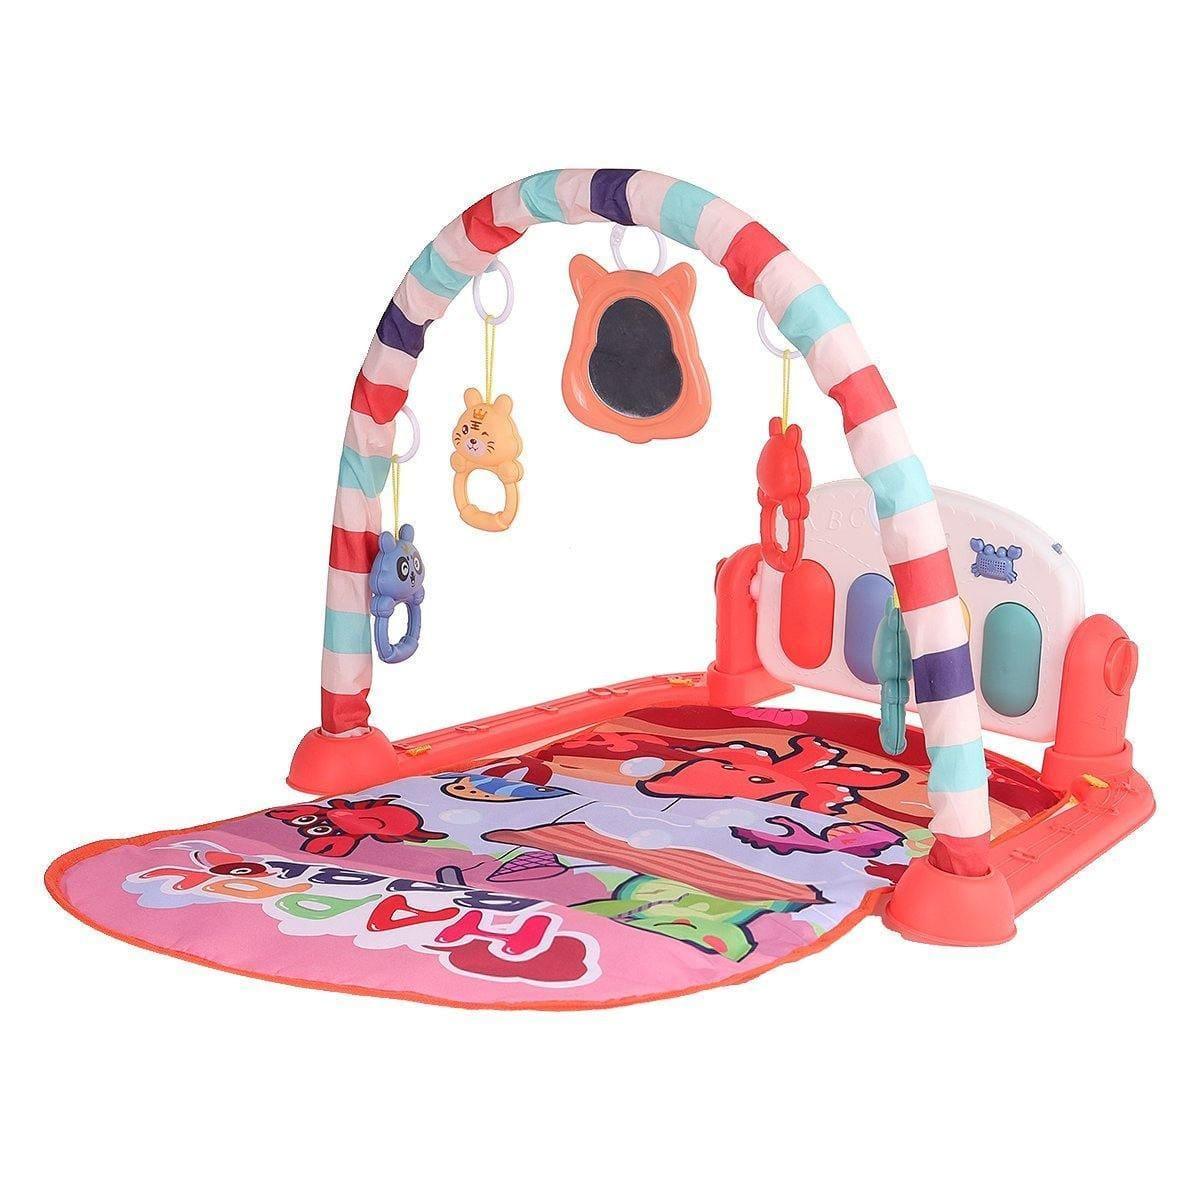 ezy2find Rattle Toys for Baby Gift Red 76x56x43CM 2 IN 1 Multi-functional Baby Gym with Play Mat Keyboard Soft Light Rattle Toys for Baby Gift